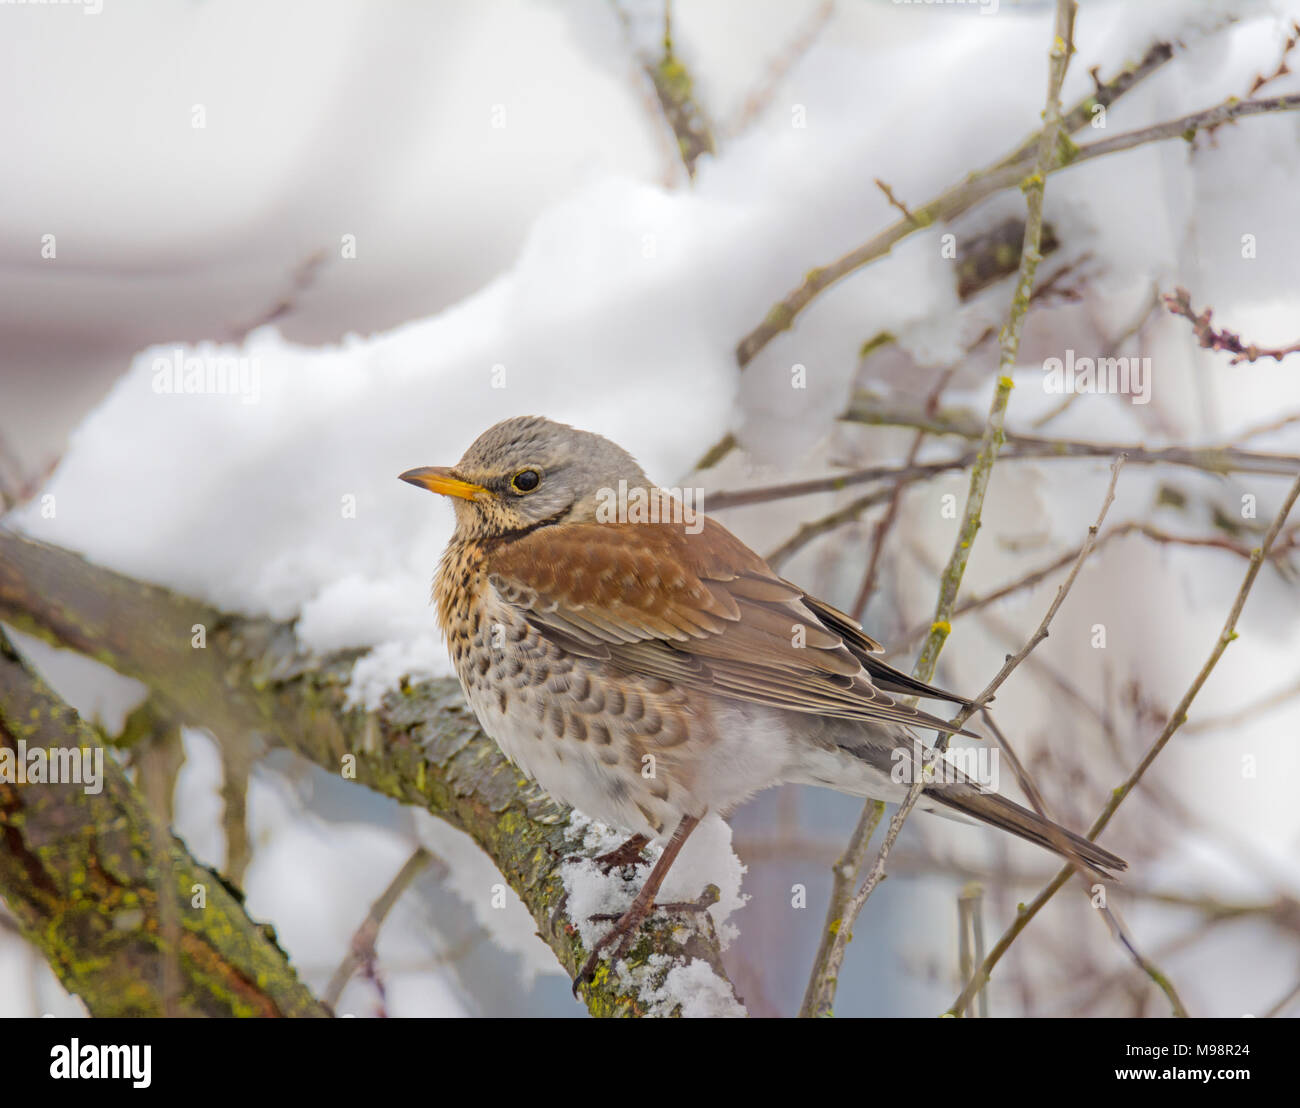 Closeup of a fieldfare bird sitting on a snow covered tree Stock Photo